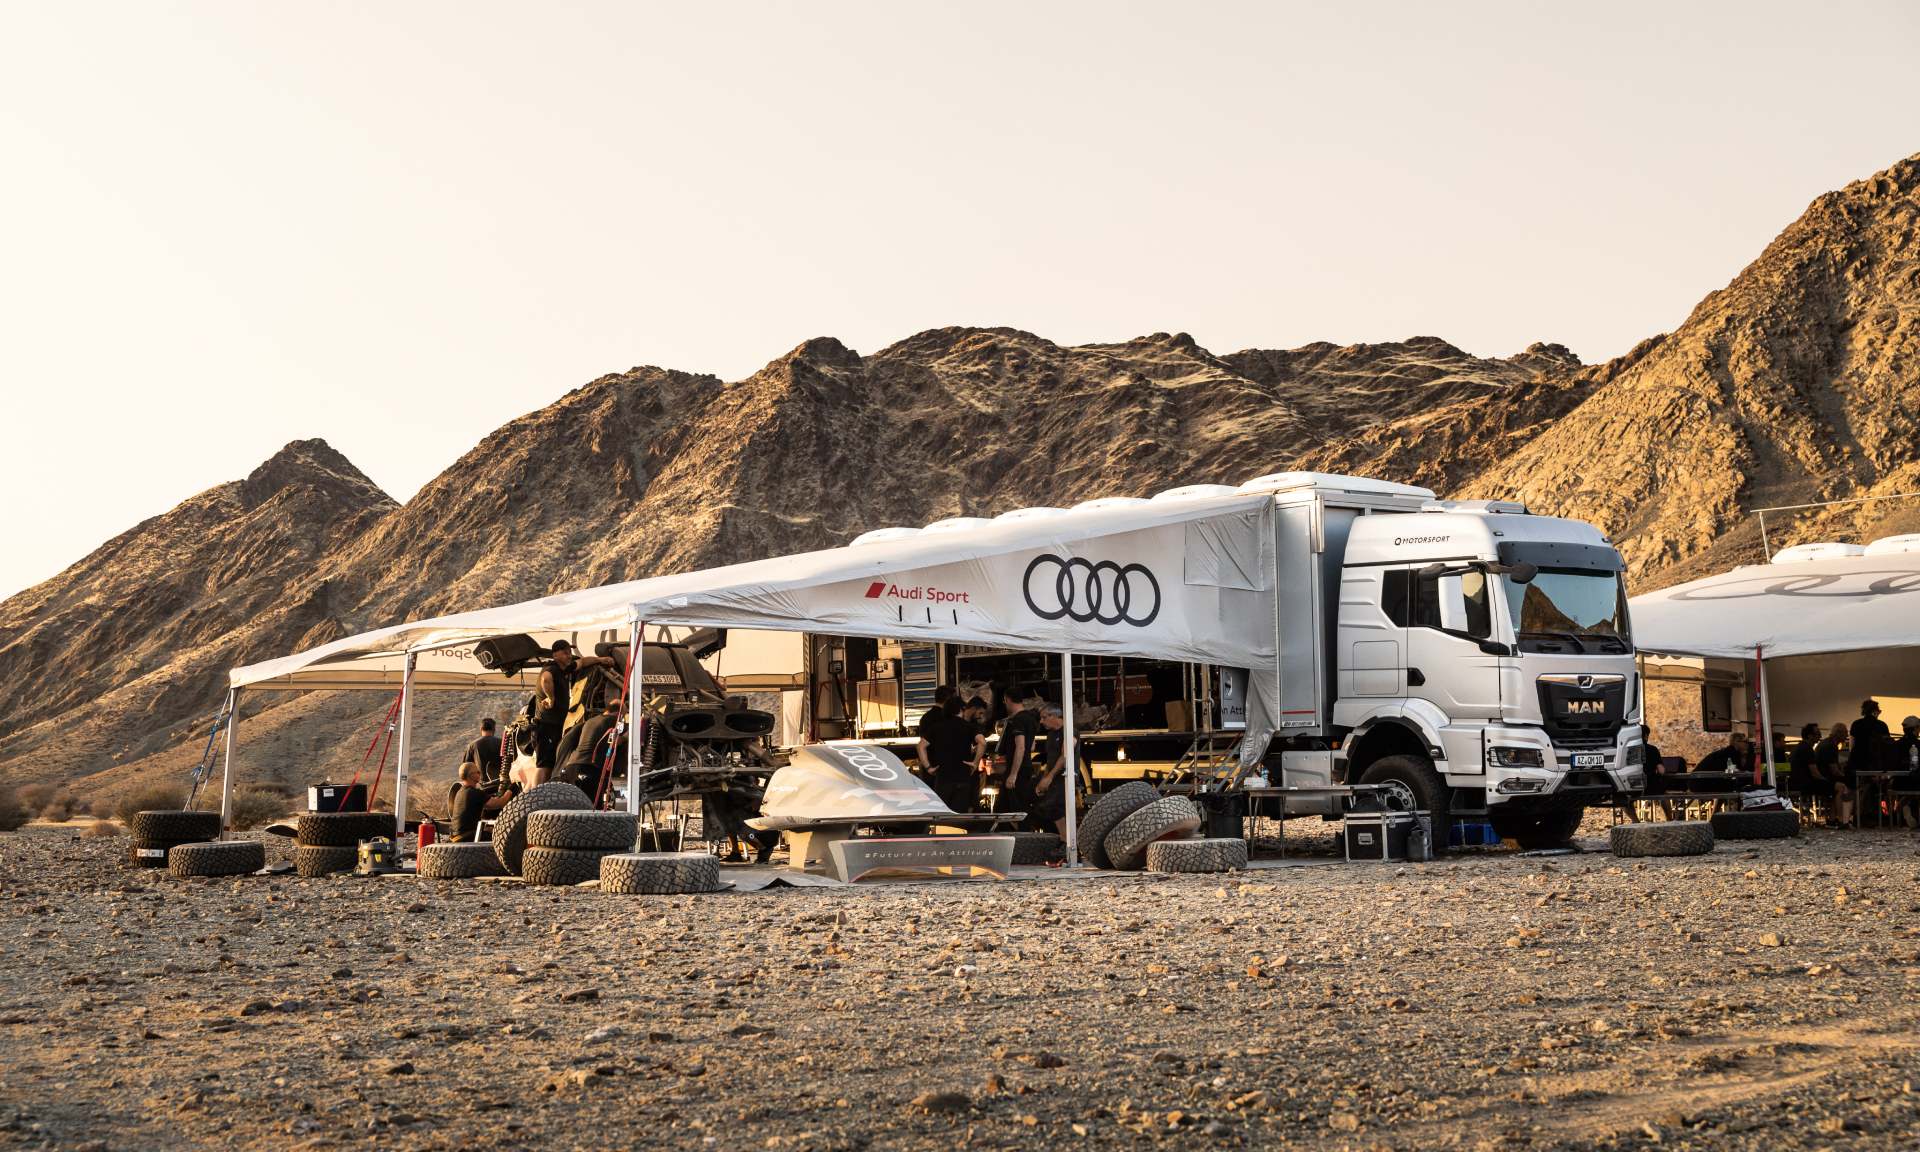 Tyres and vehicles at the Audi base camp during the test phase in Saudi Arabia.